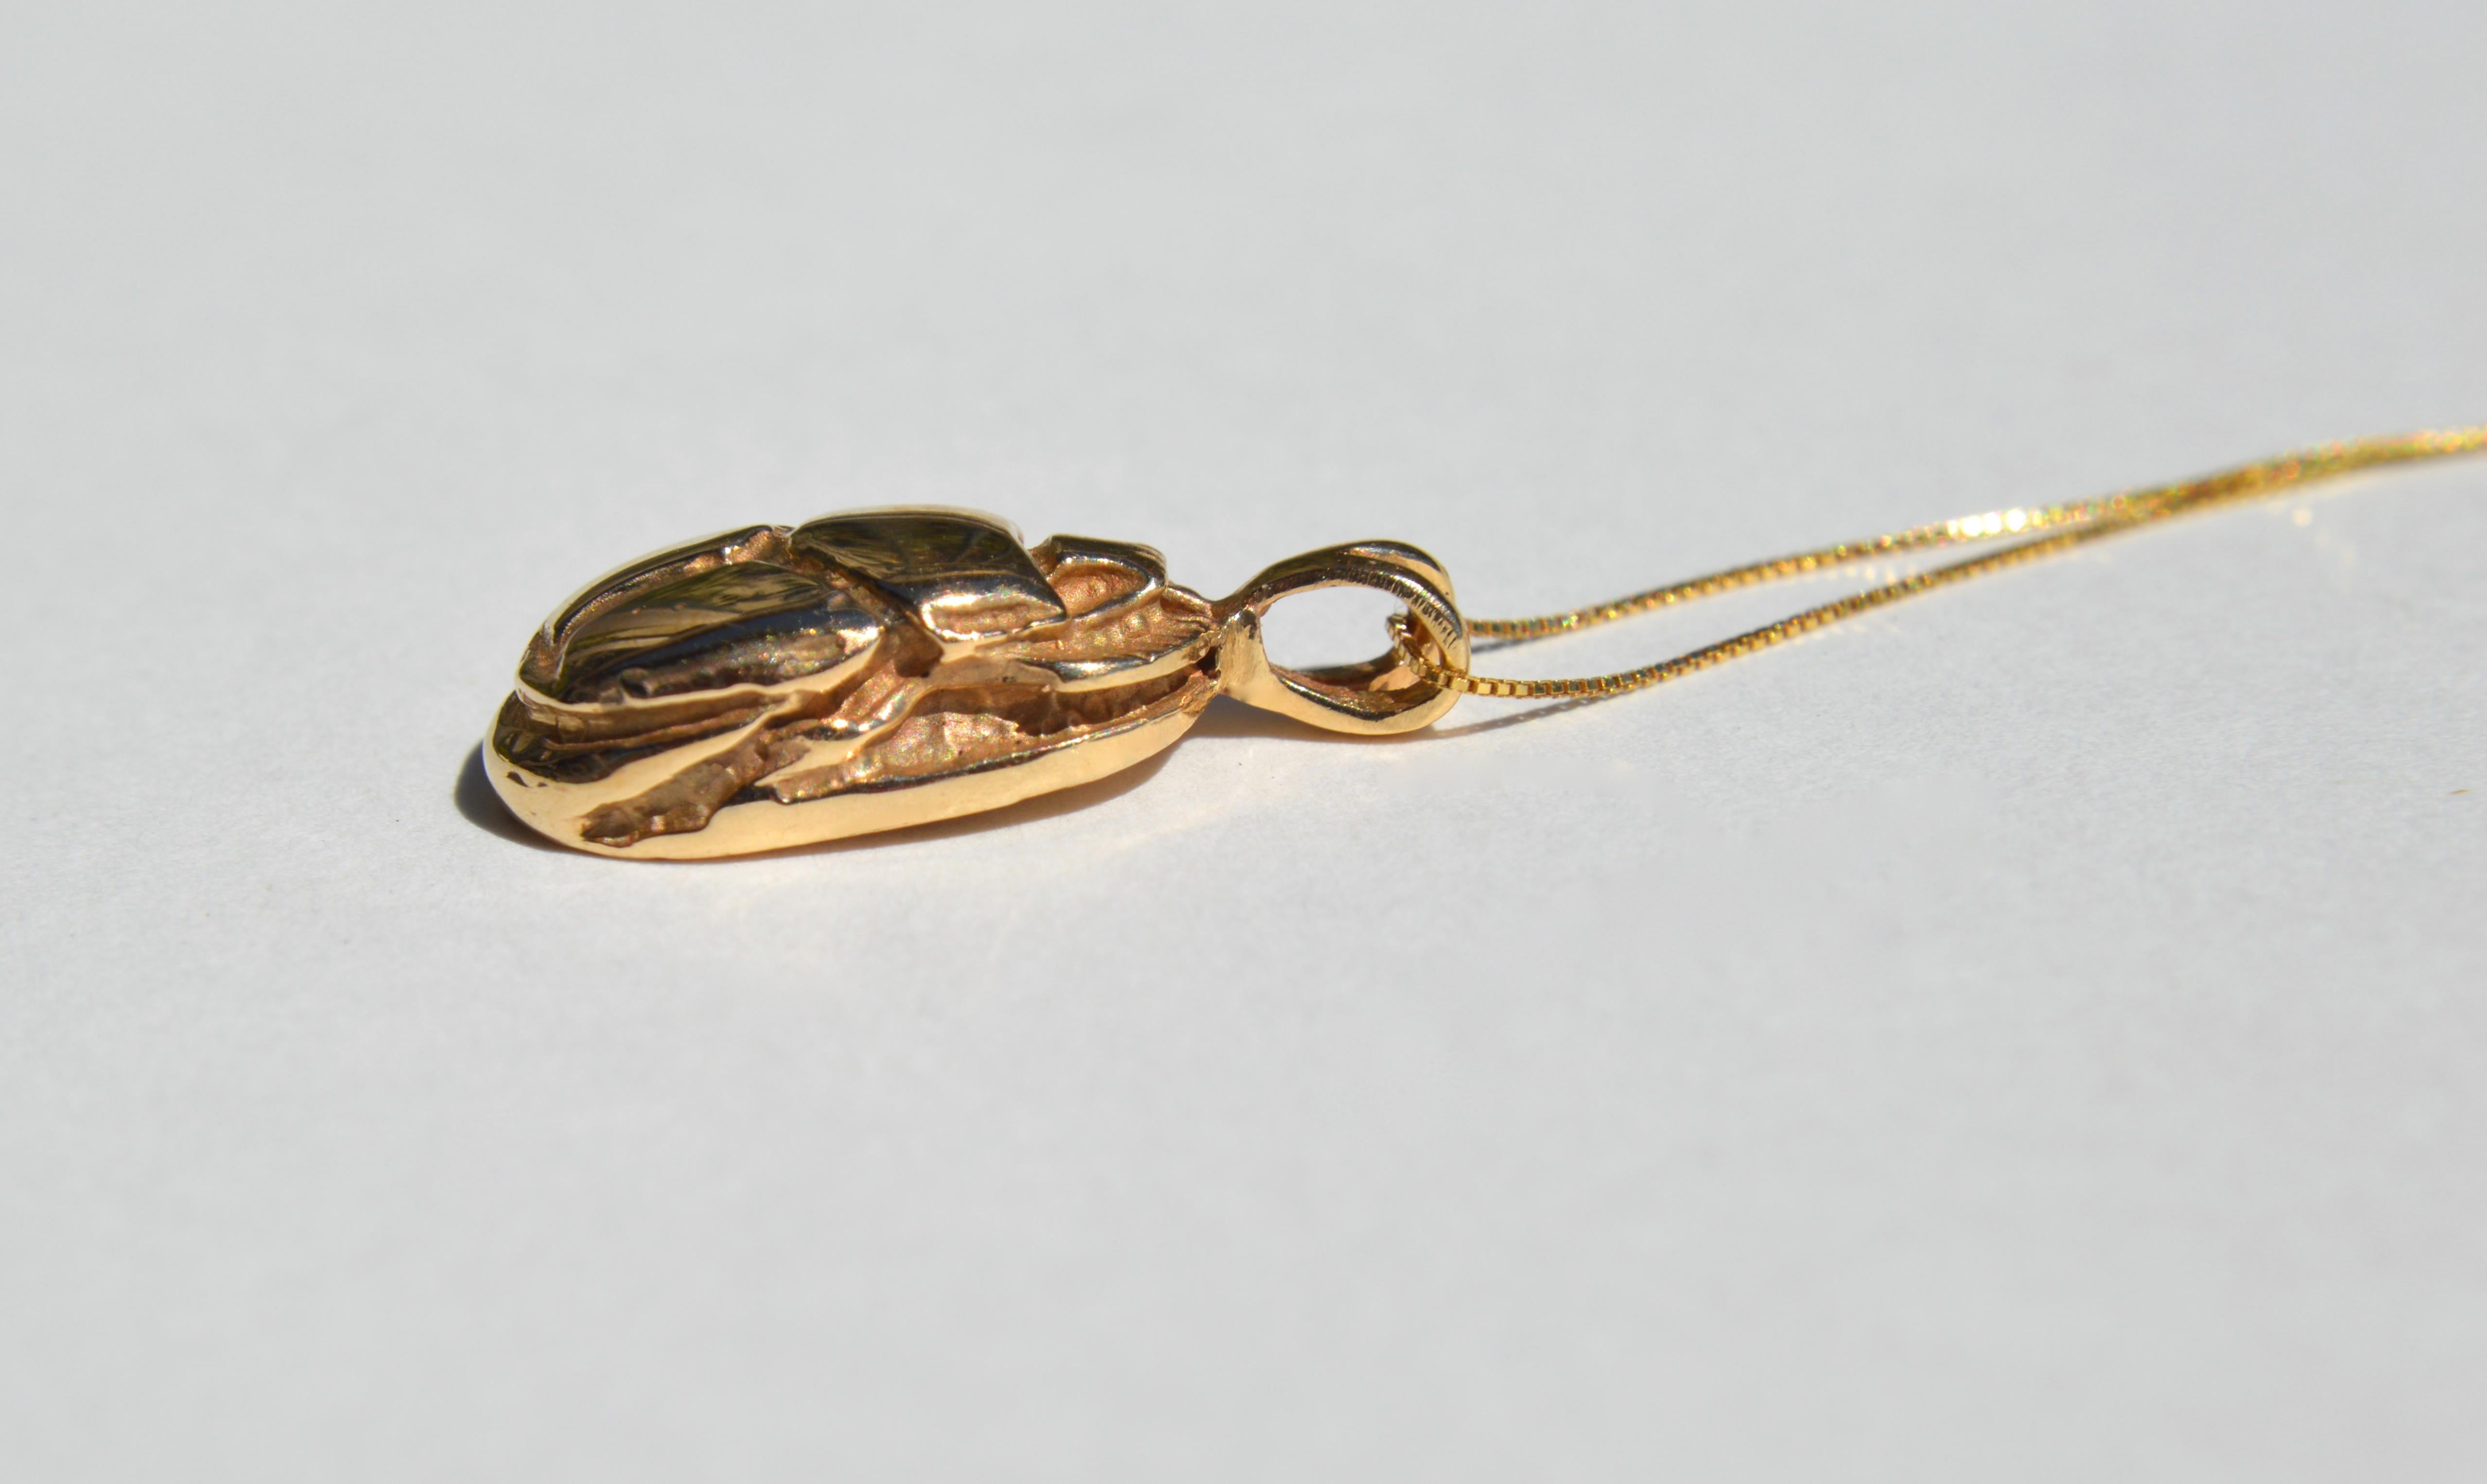 Beautiful Egyptian revival scarab beetle charm in solid 14K yellow gold, cast from an Art Deco era original. Ancient Egyptian symbols or scene on back. 3/4